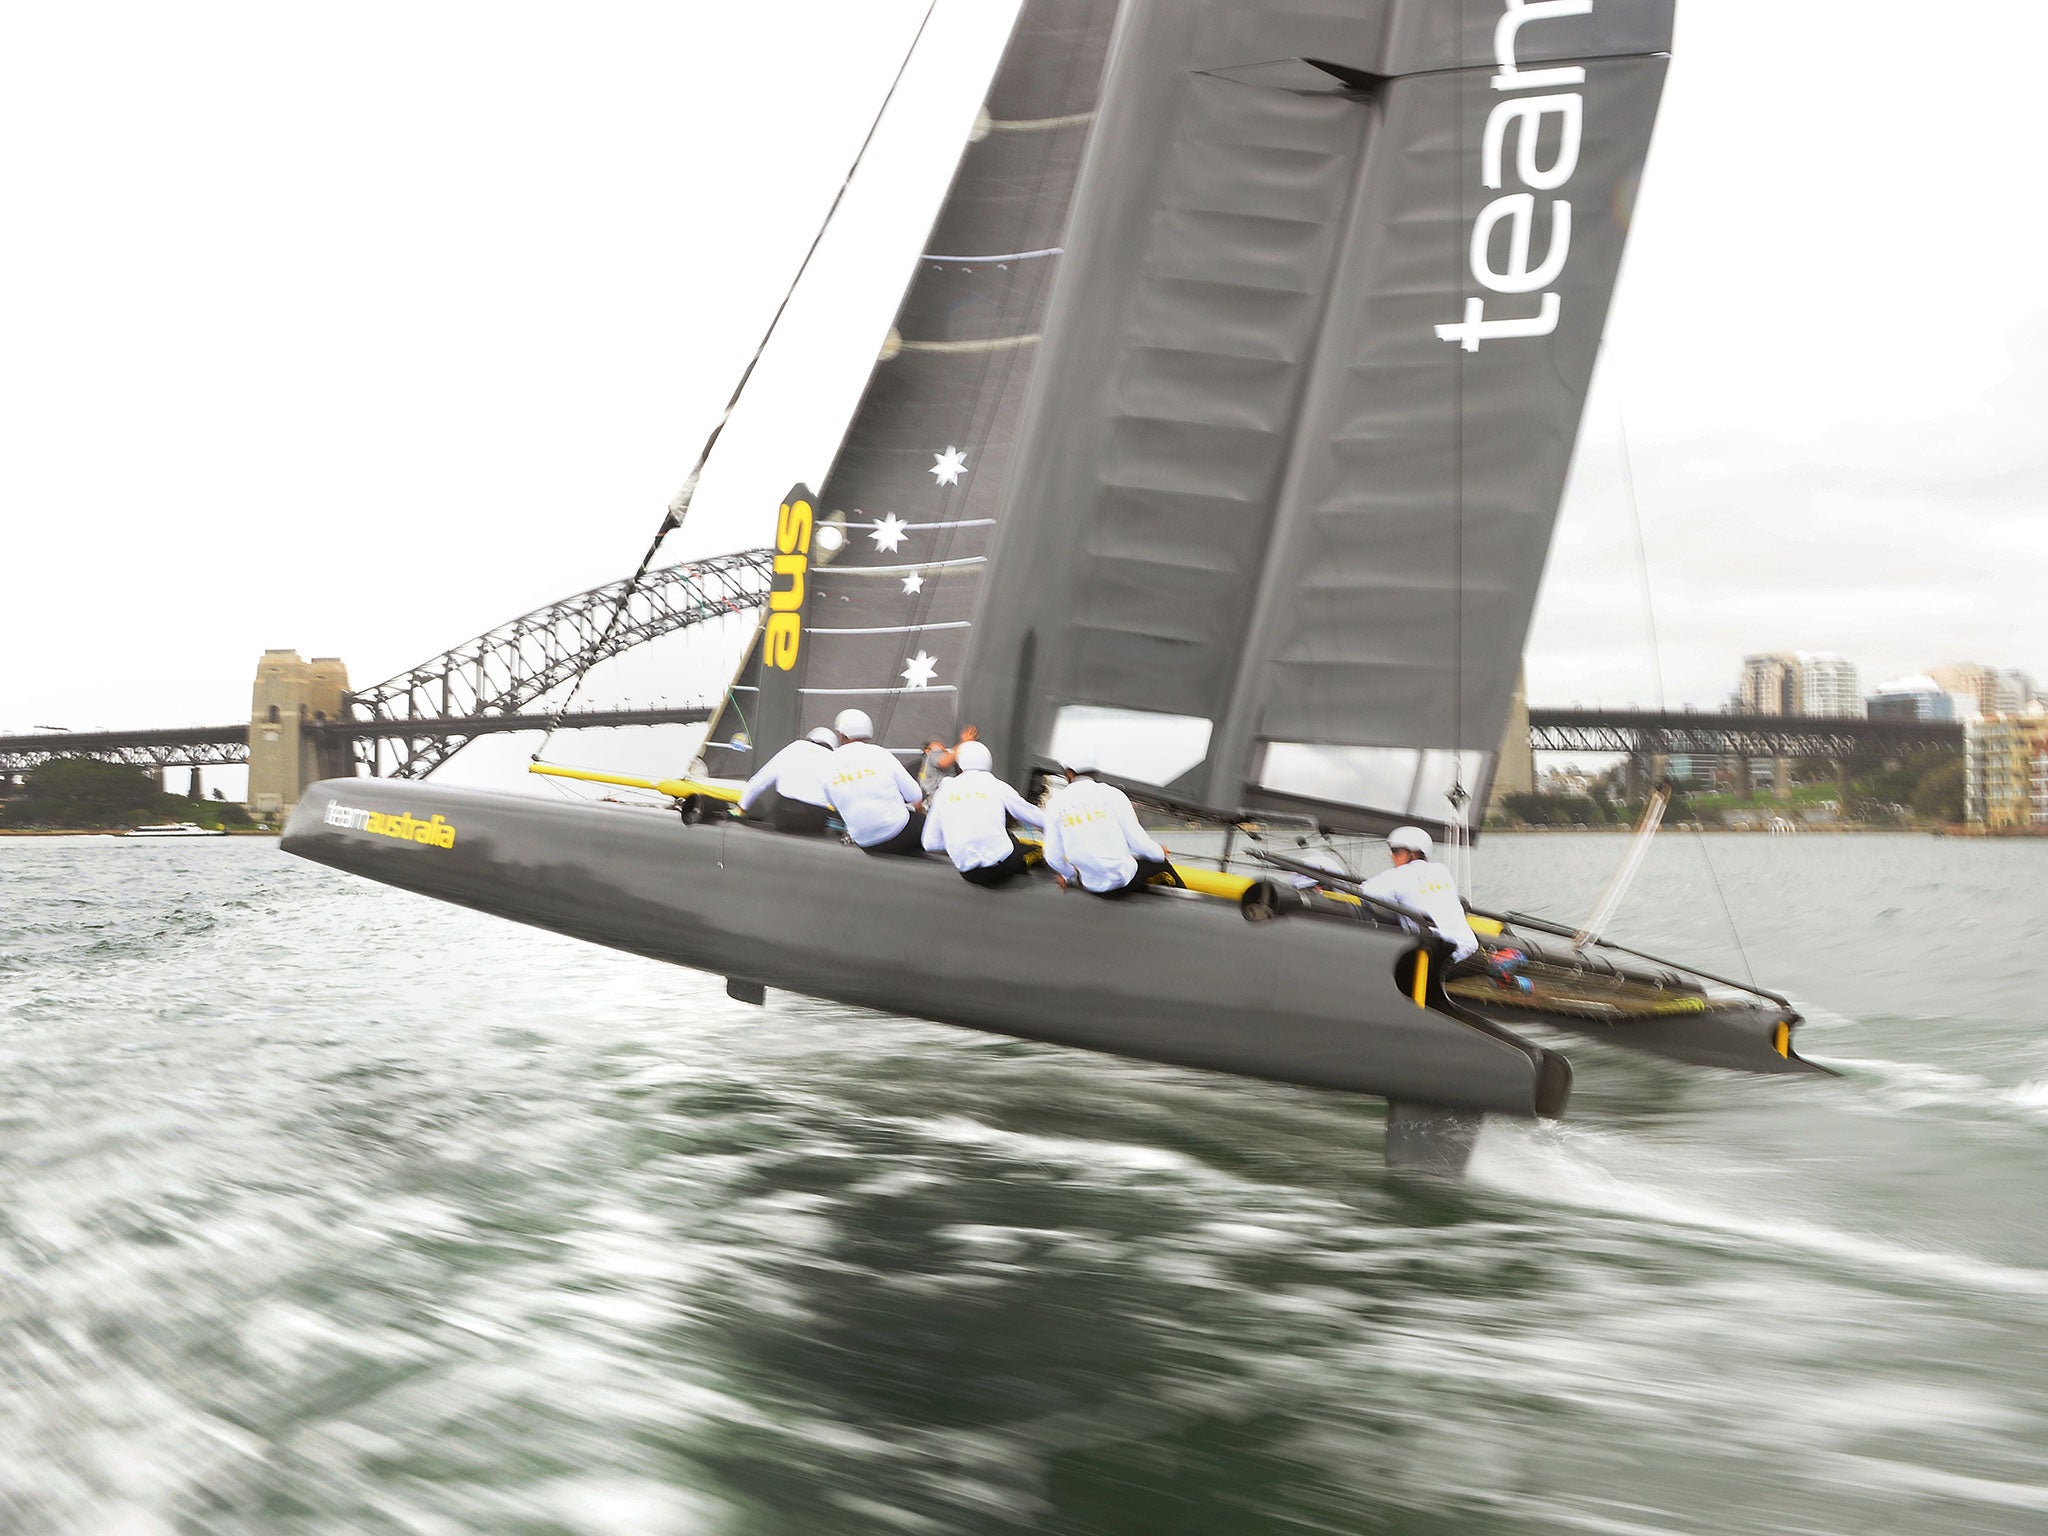 Team Australia's new AC45 catamaran speeds over the water during its first outing on Sydney Harbour